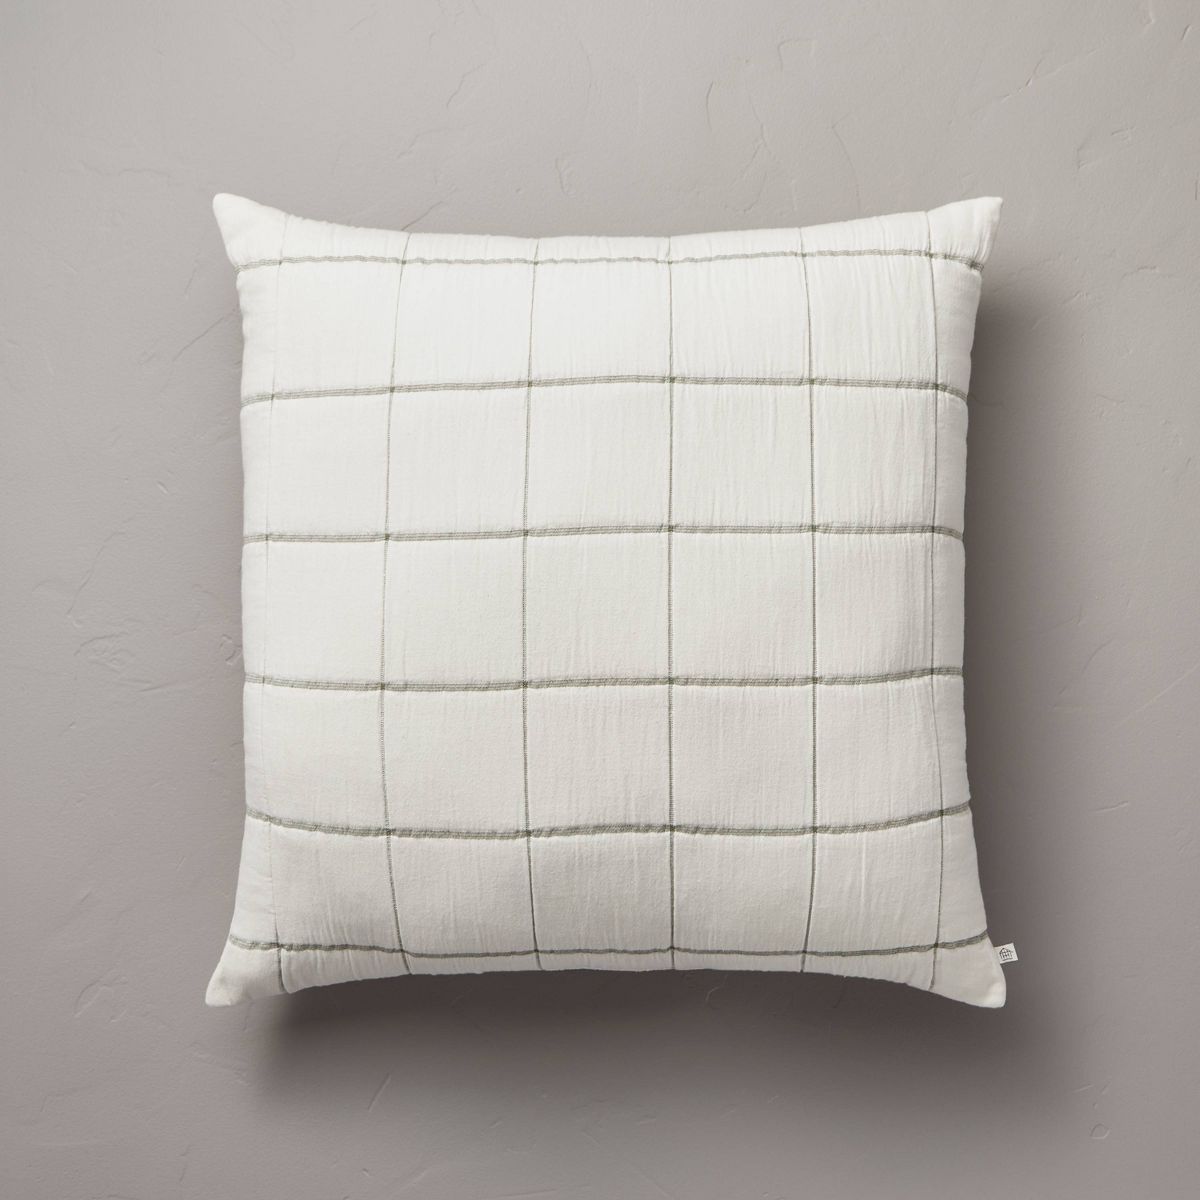 26"x26" Grid Lines Matelassé Euro Bed Pillow  - Hearth & Hand™ with Magnolia | Target